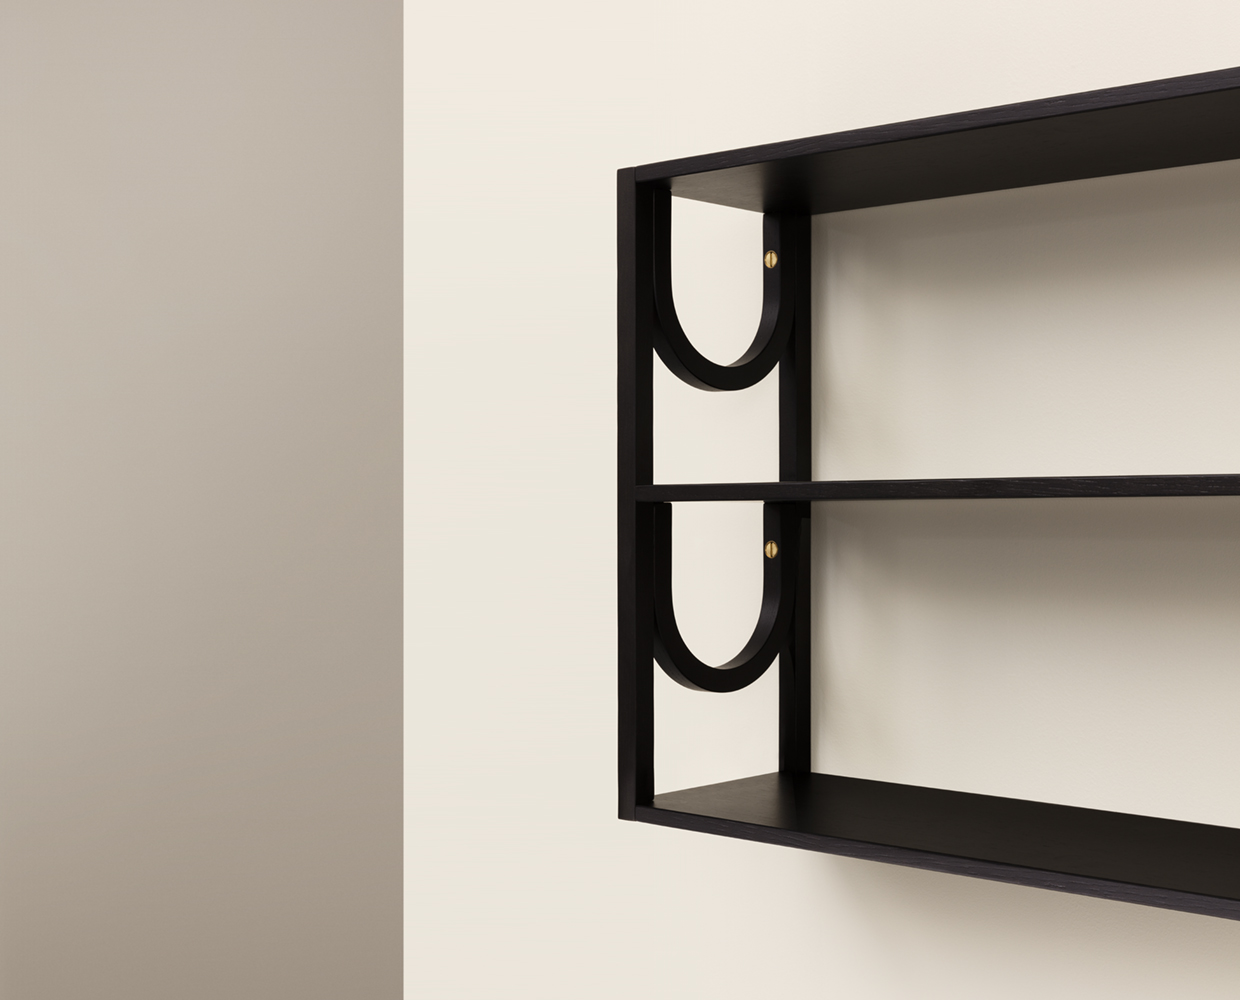 Arch Bookshelf by Note Design Studio for Fogia